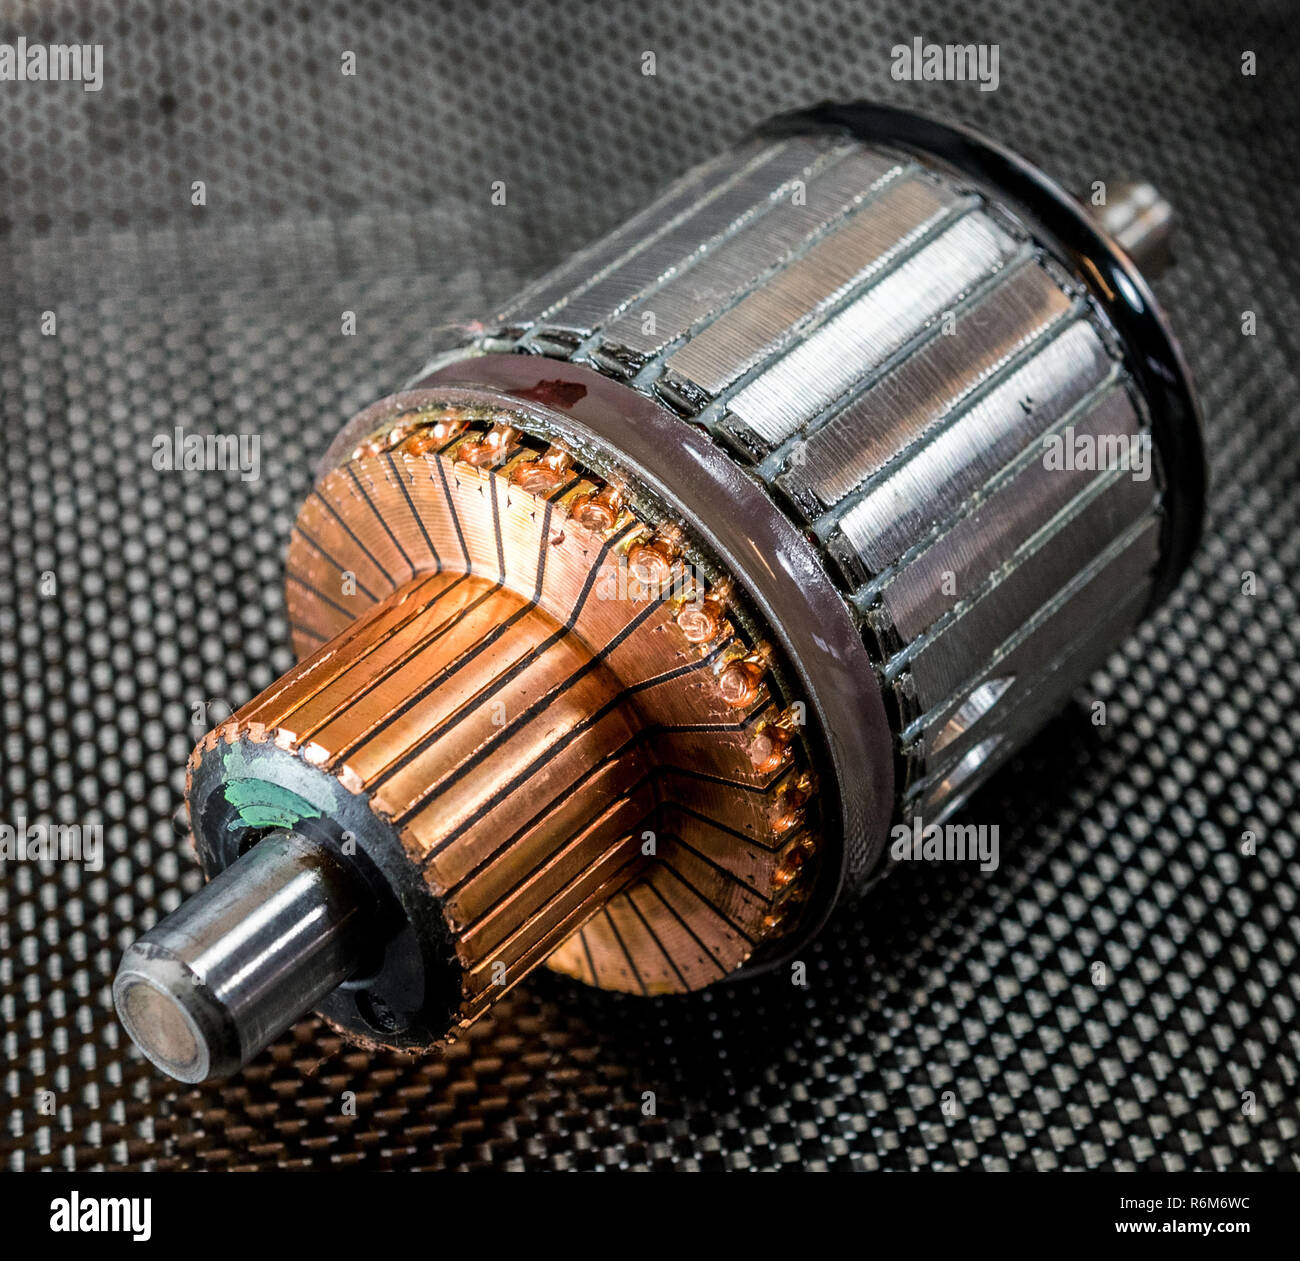 DC motor armature - Stock Image - C026/6658 - Science Photo Library